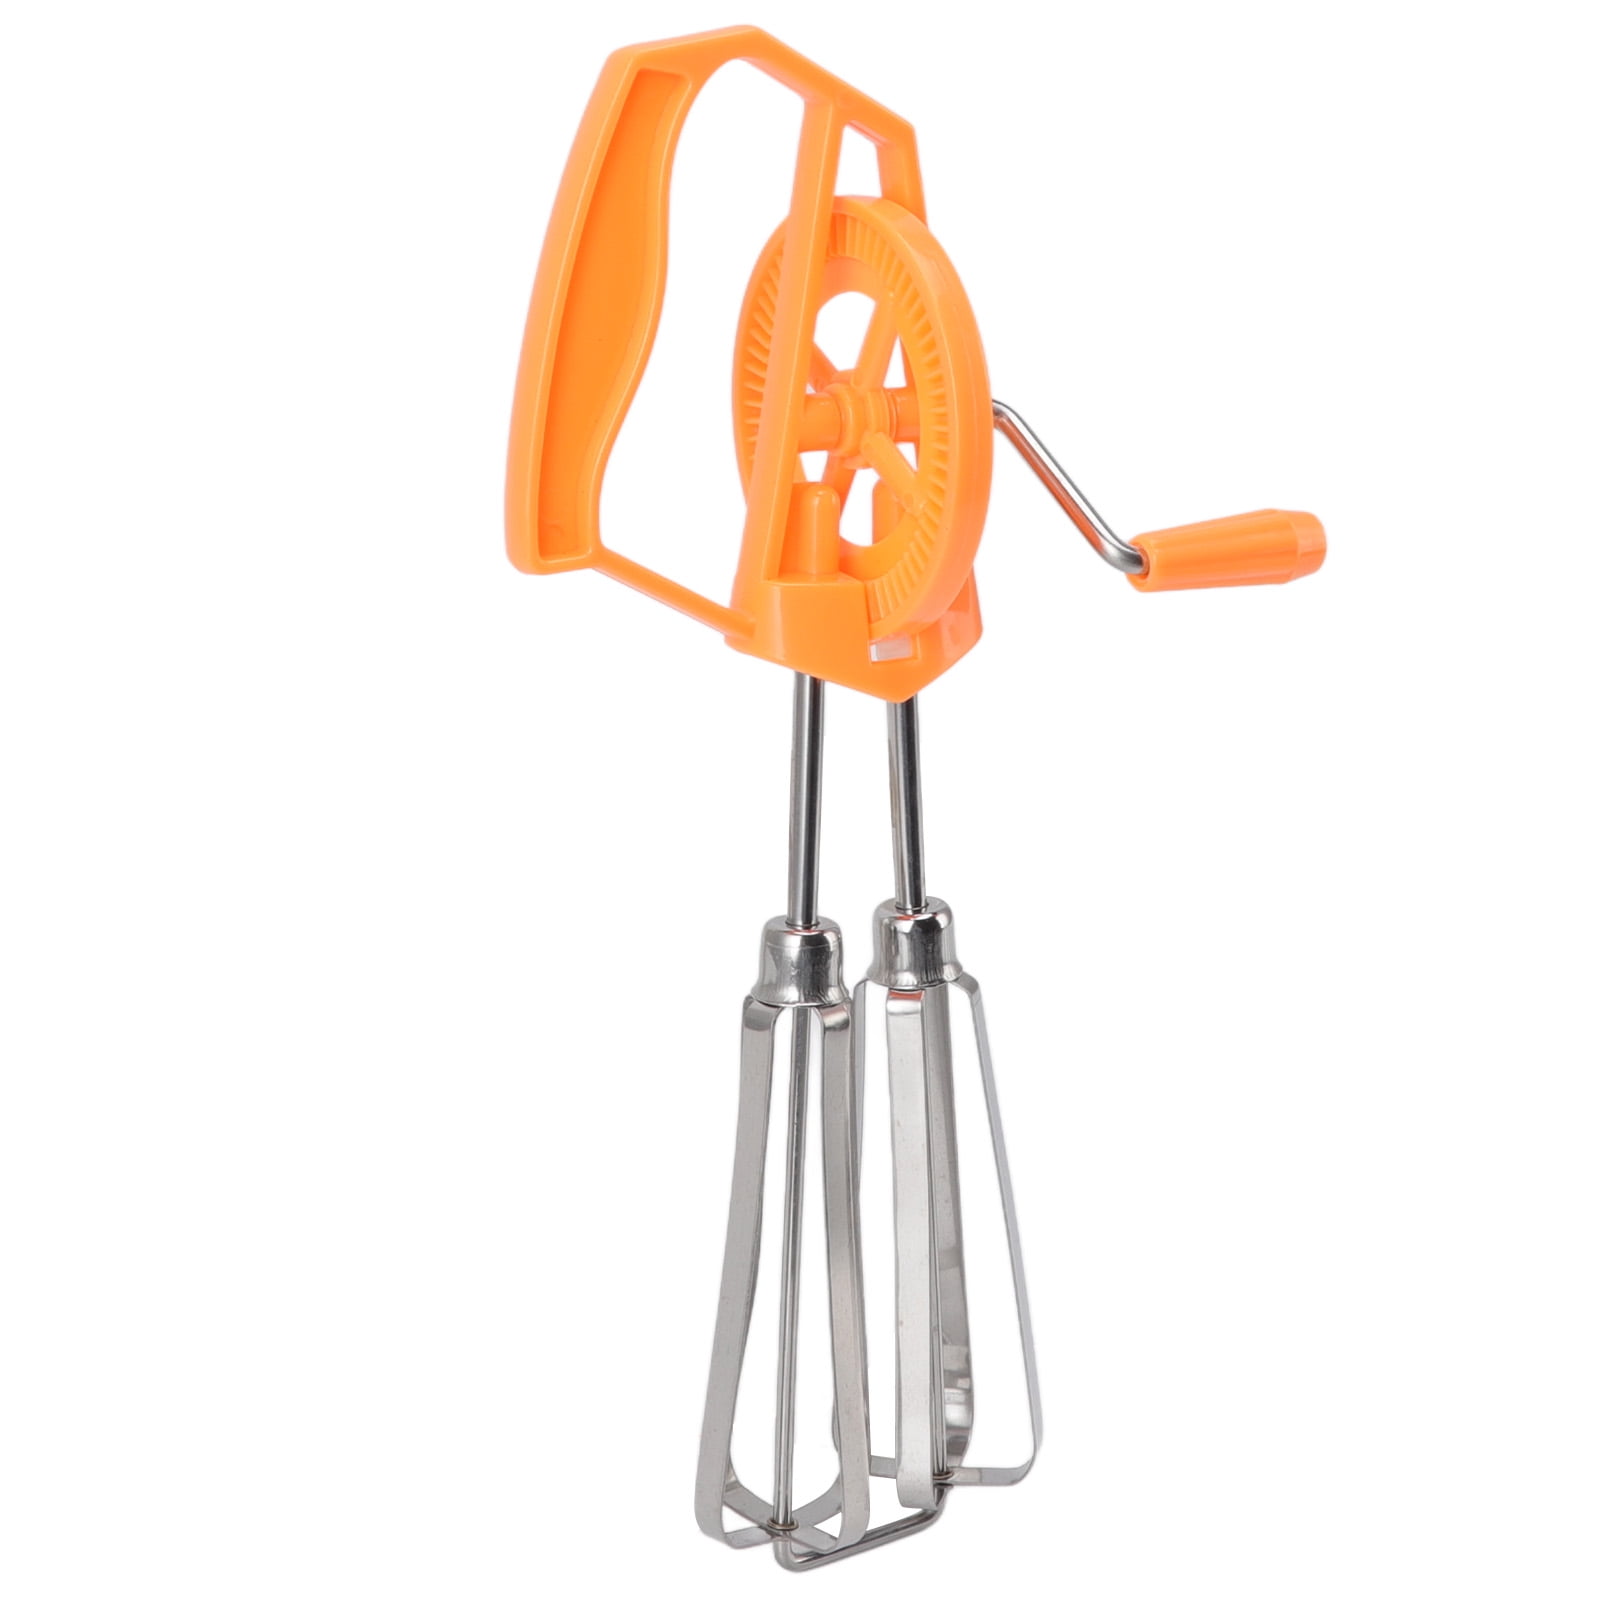  Manual Hand Mixer Hand Crank Stainless Steel For Home White,Orange